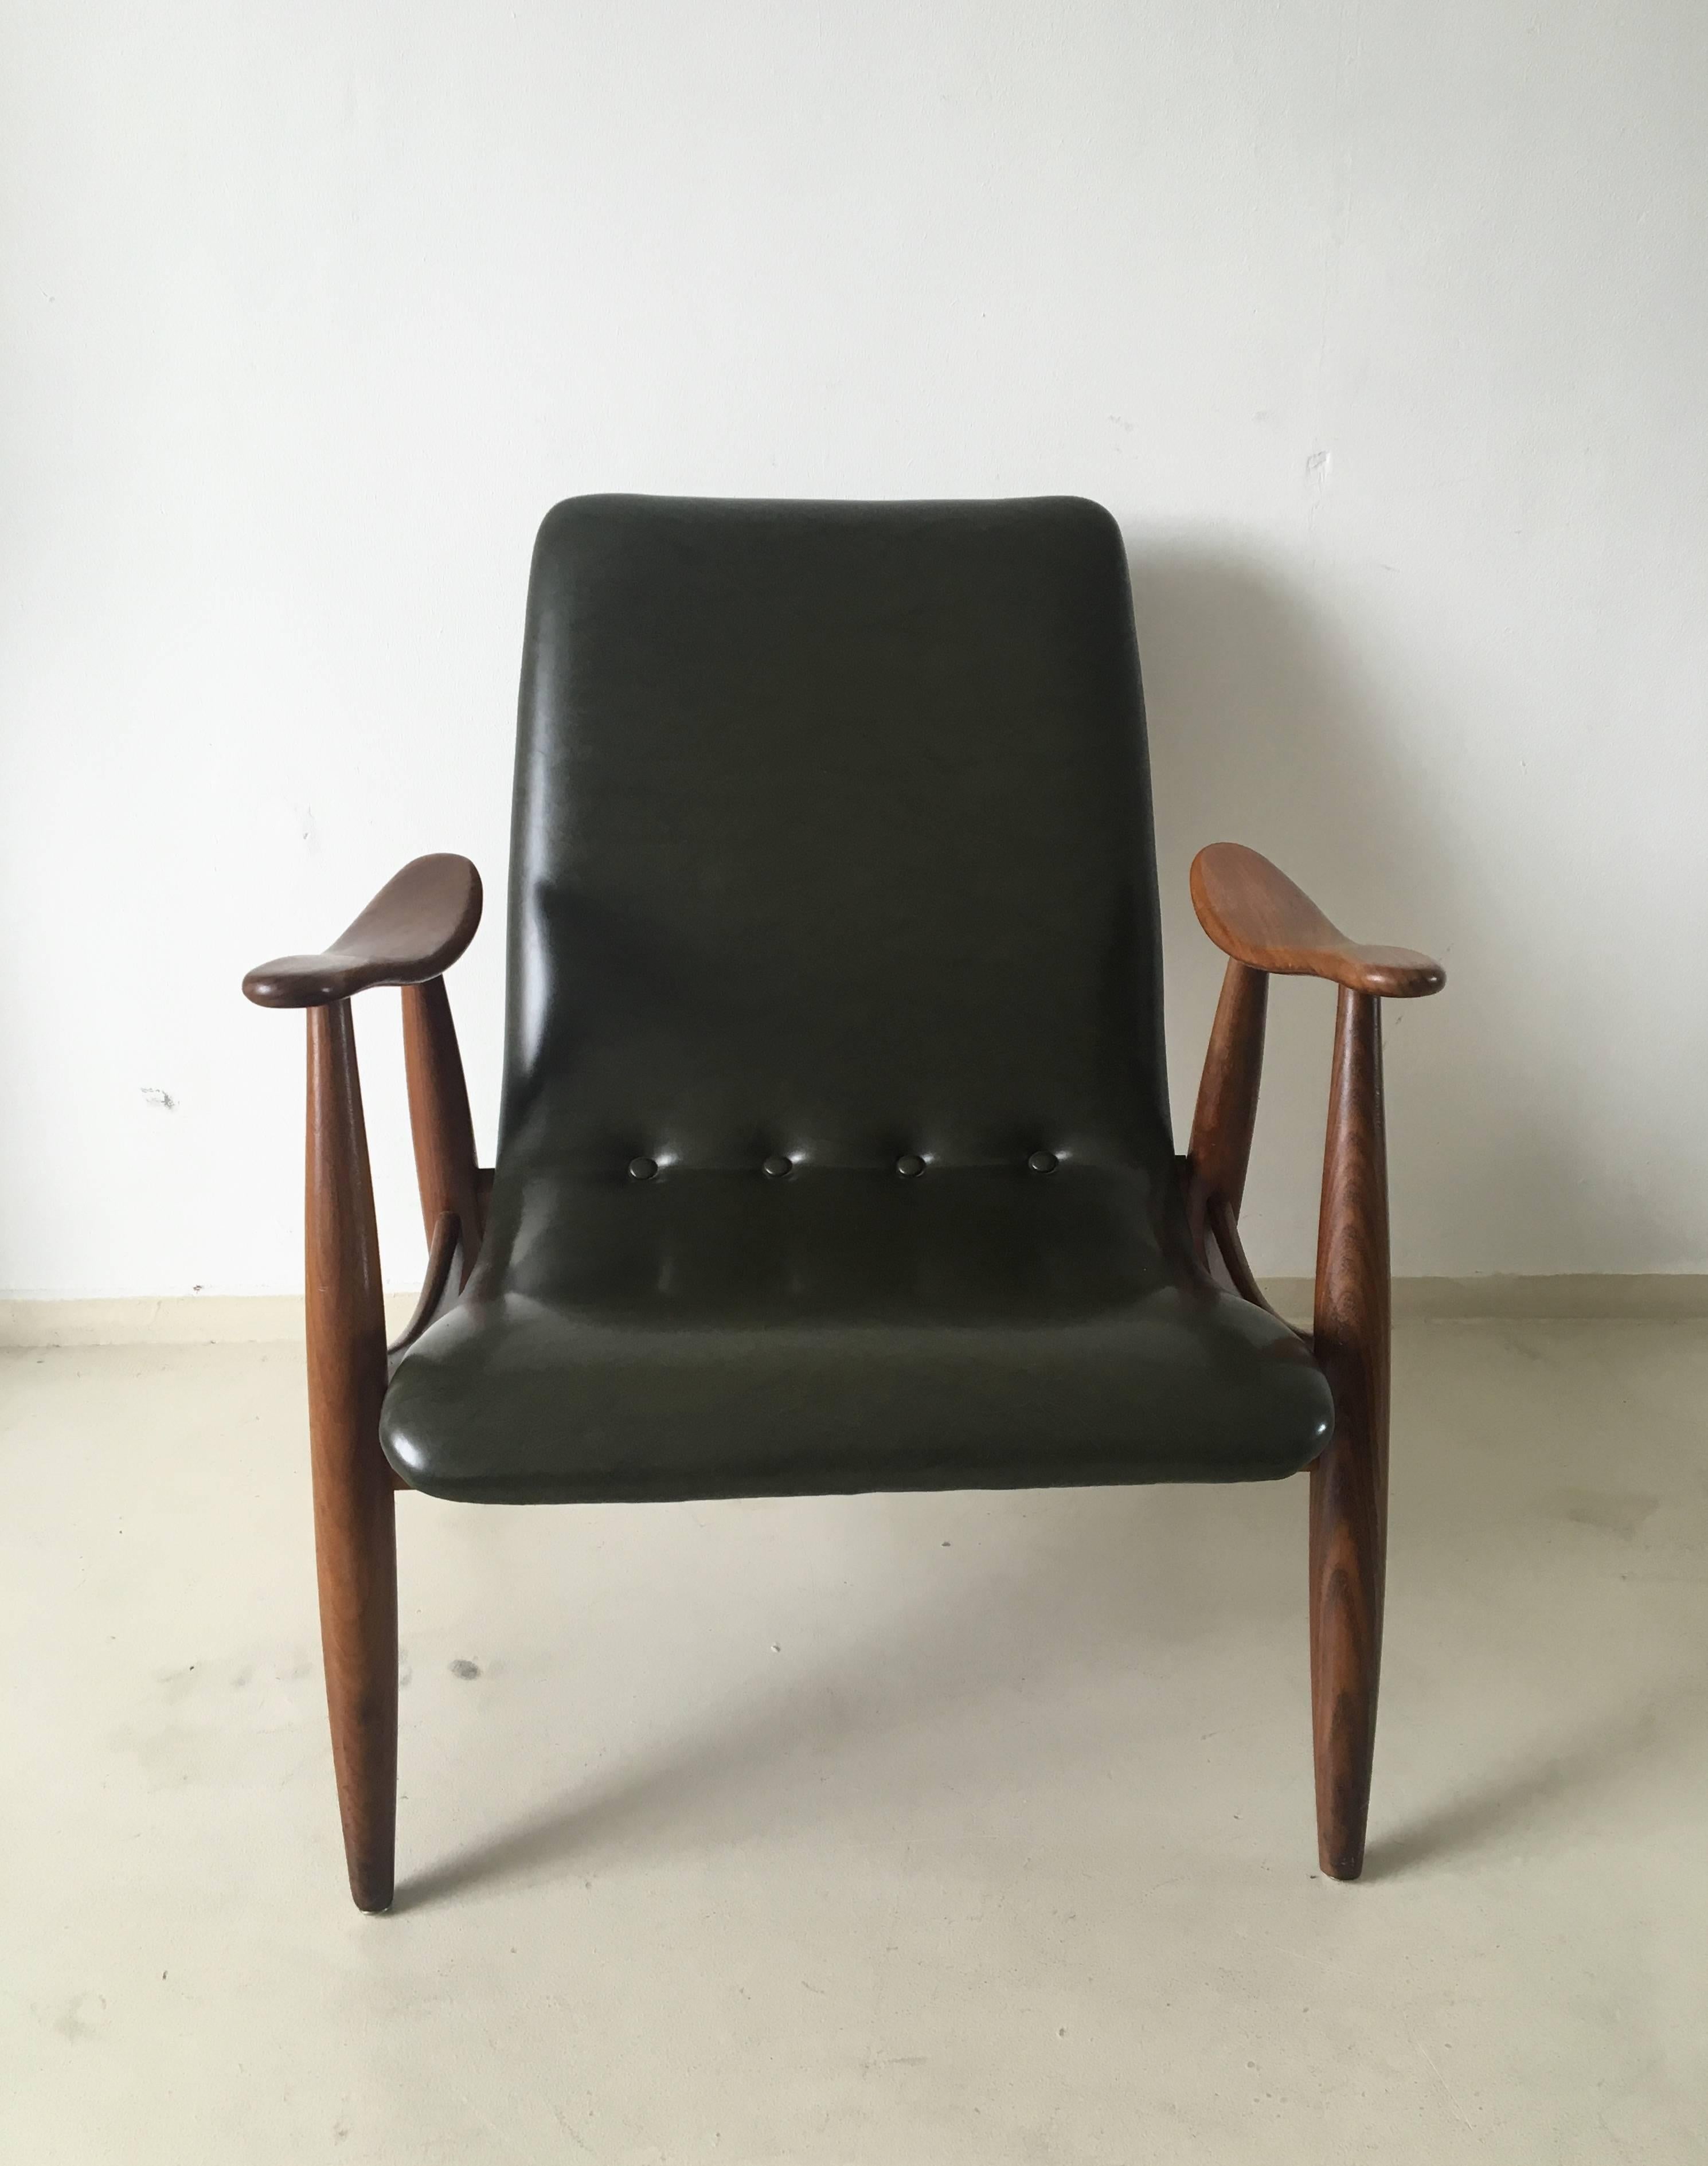 This lounge chair comes with a beautiful organic shaped teak frame, with the original deep green leatherette upholstery. This chair remains in very good condition with minor signs of wear.